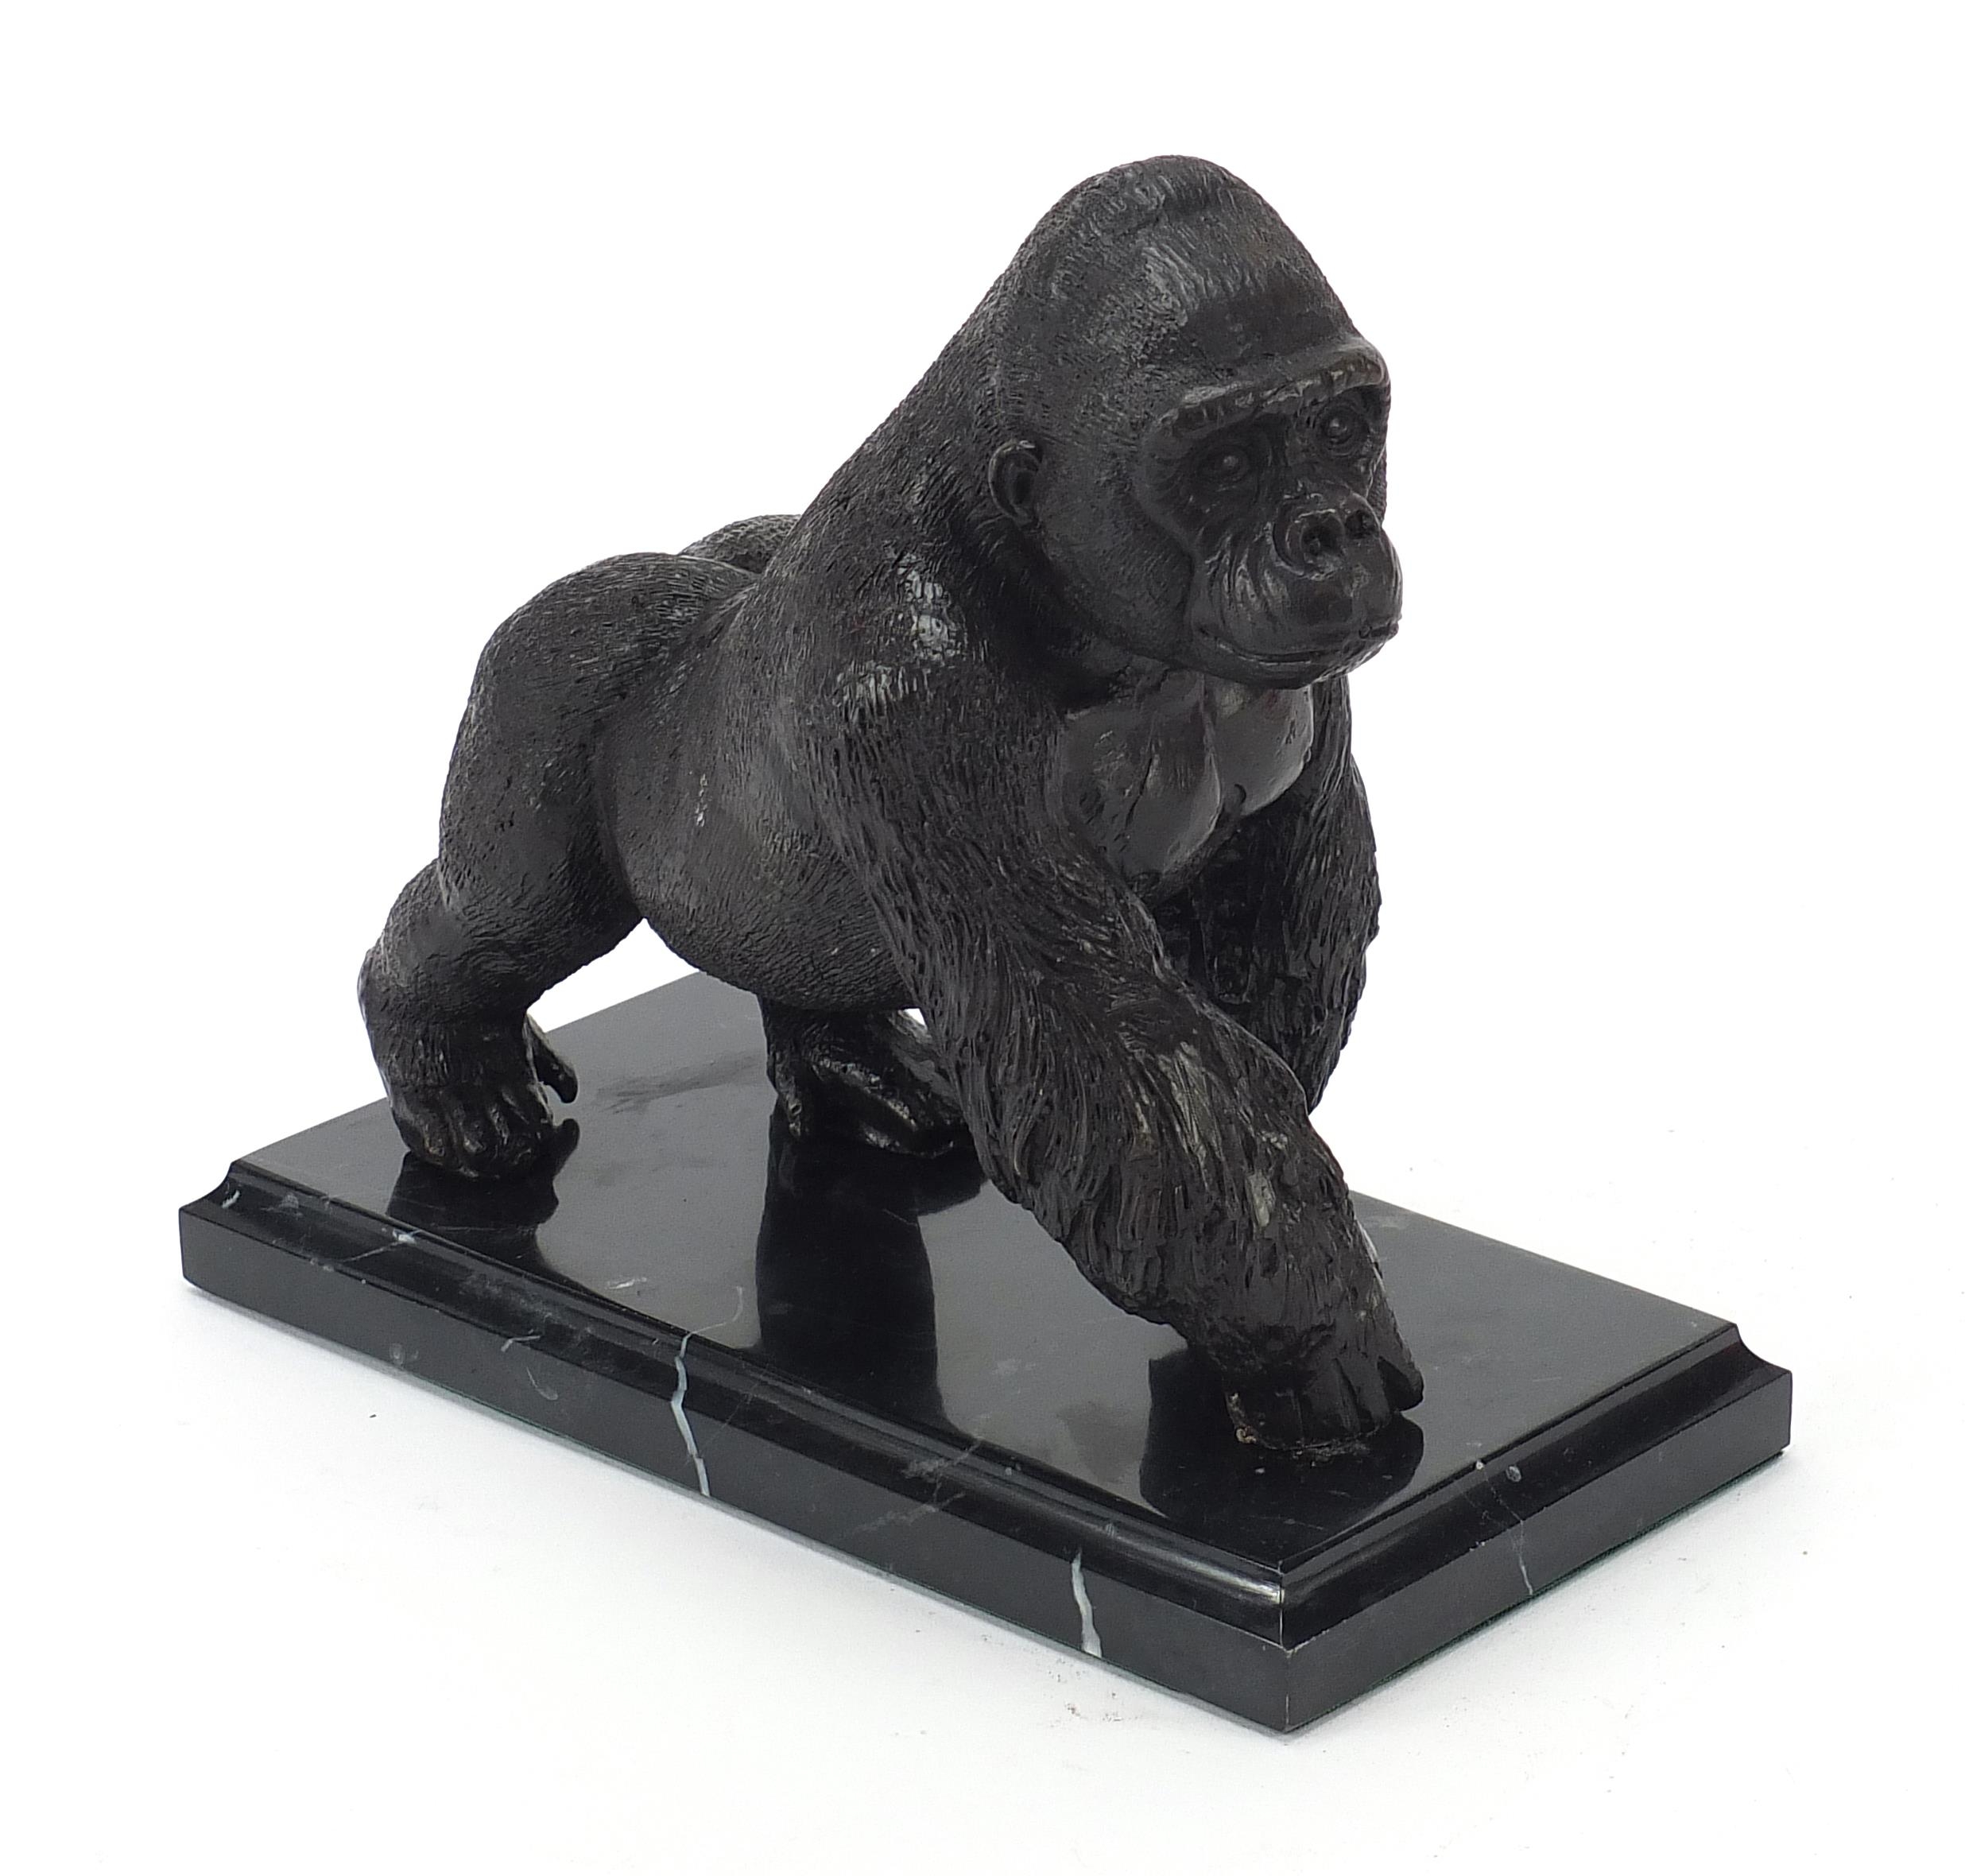 Patinated bronze gorilla raised on a black marble base, 20cm wide